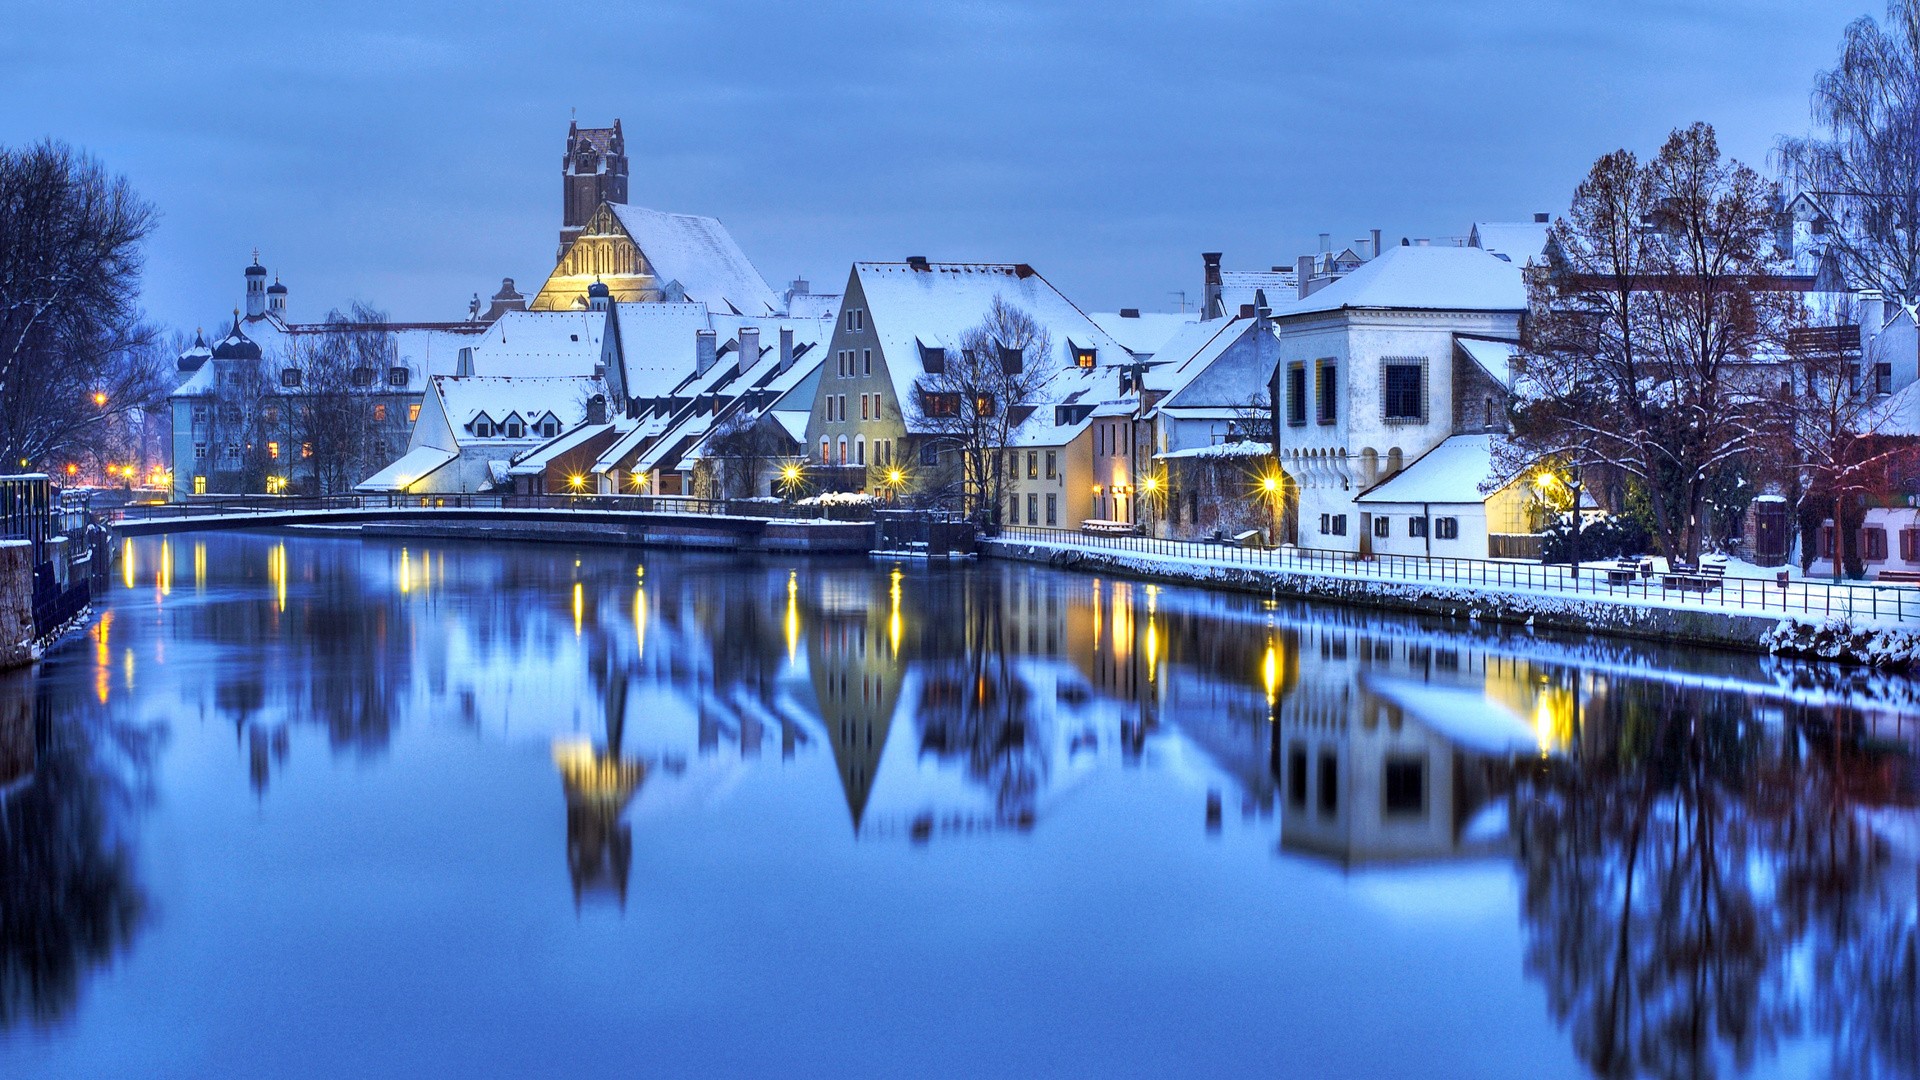 General 1920x1080 city cityscape winter house river snow calm town reflection evening blue bridge tower water idyllic